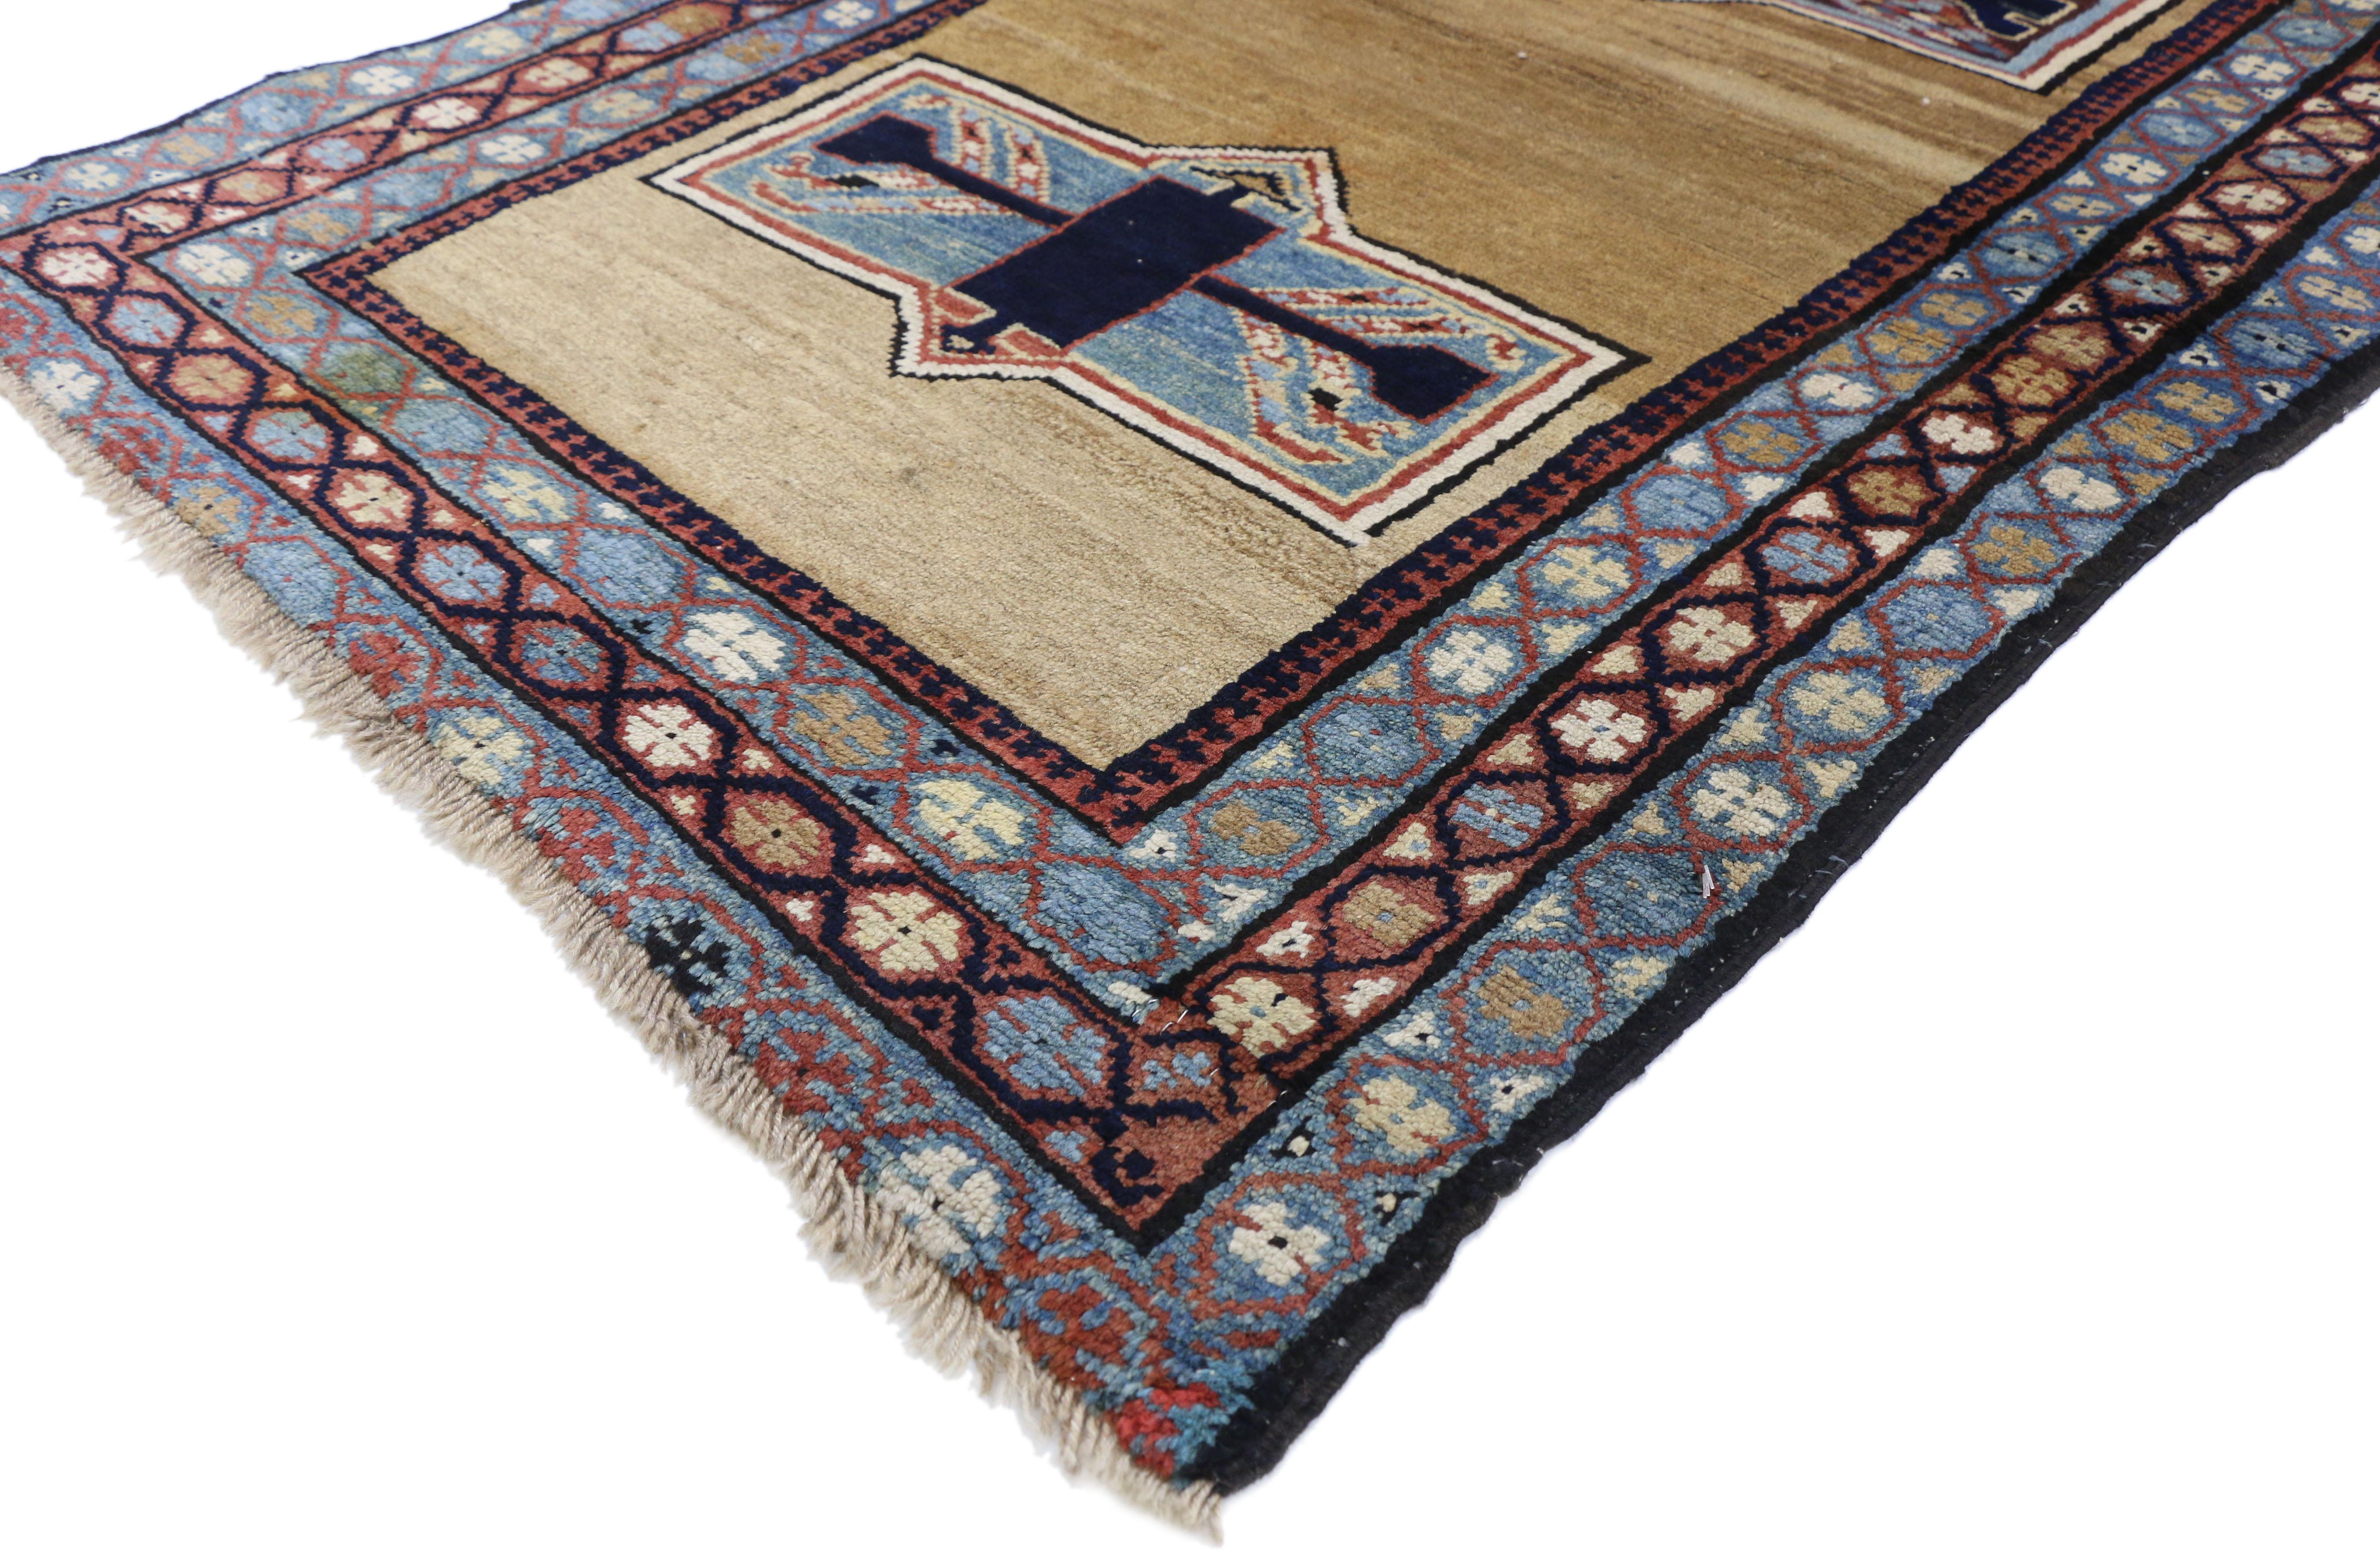 75633, antique Persian Azerbaijan rug with Tribal Mid-Century Modern style. This hand knotted wool antique Persian Azerbaijan rug features two decagonal medallions floating on an abrashed beige field. Two rectangles with Arabic signatures appear at